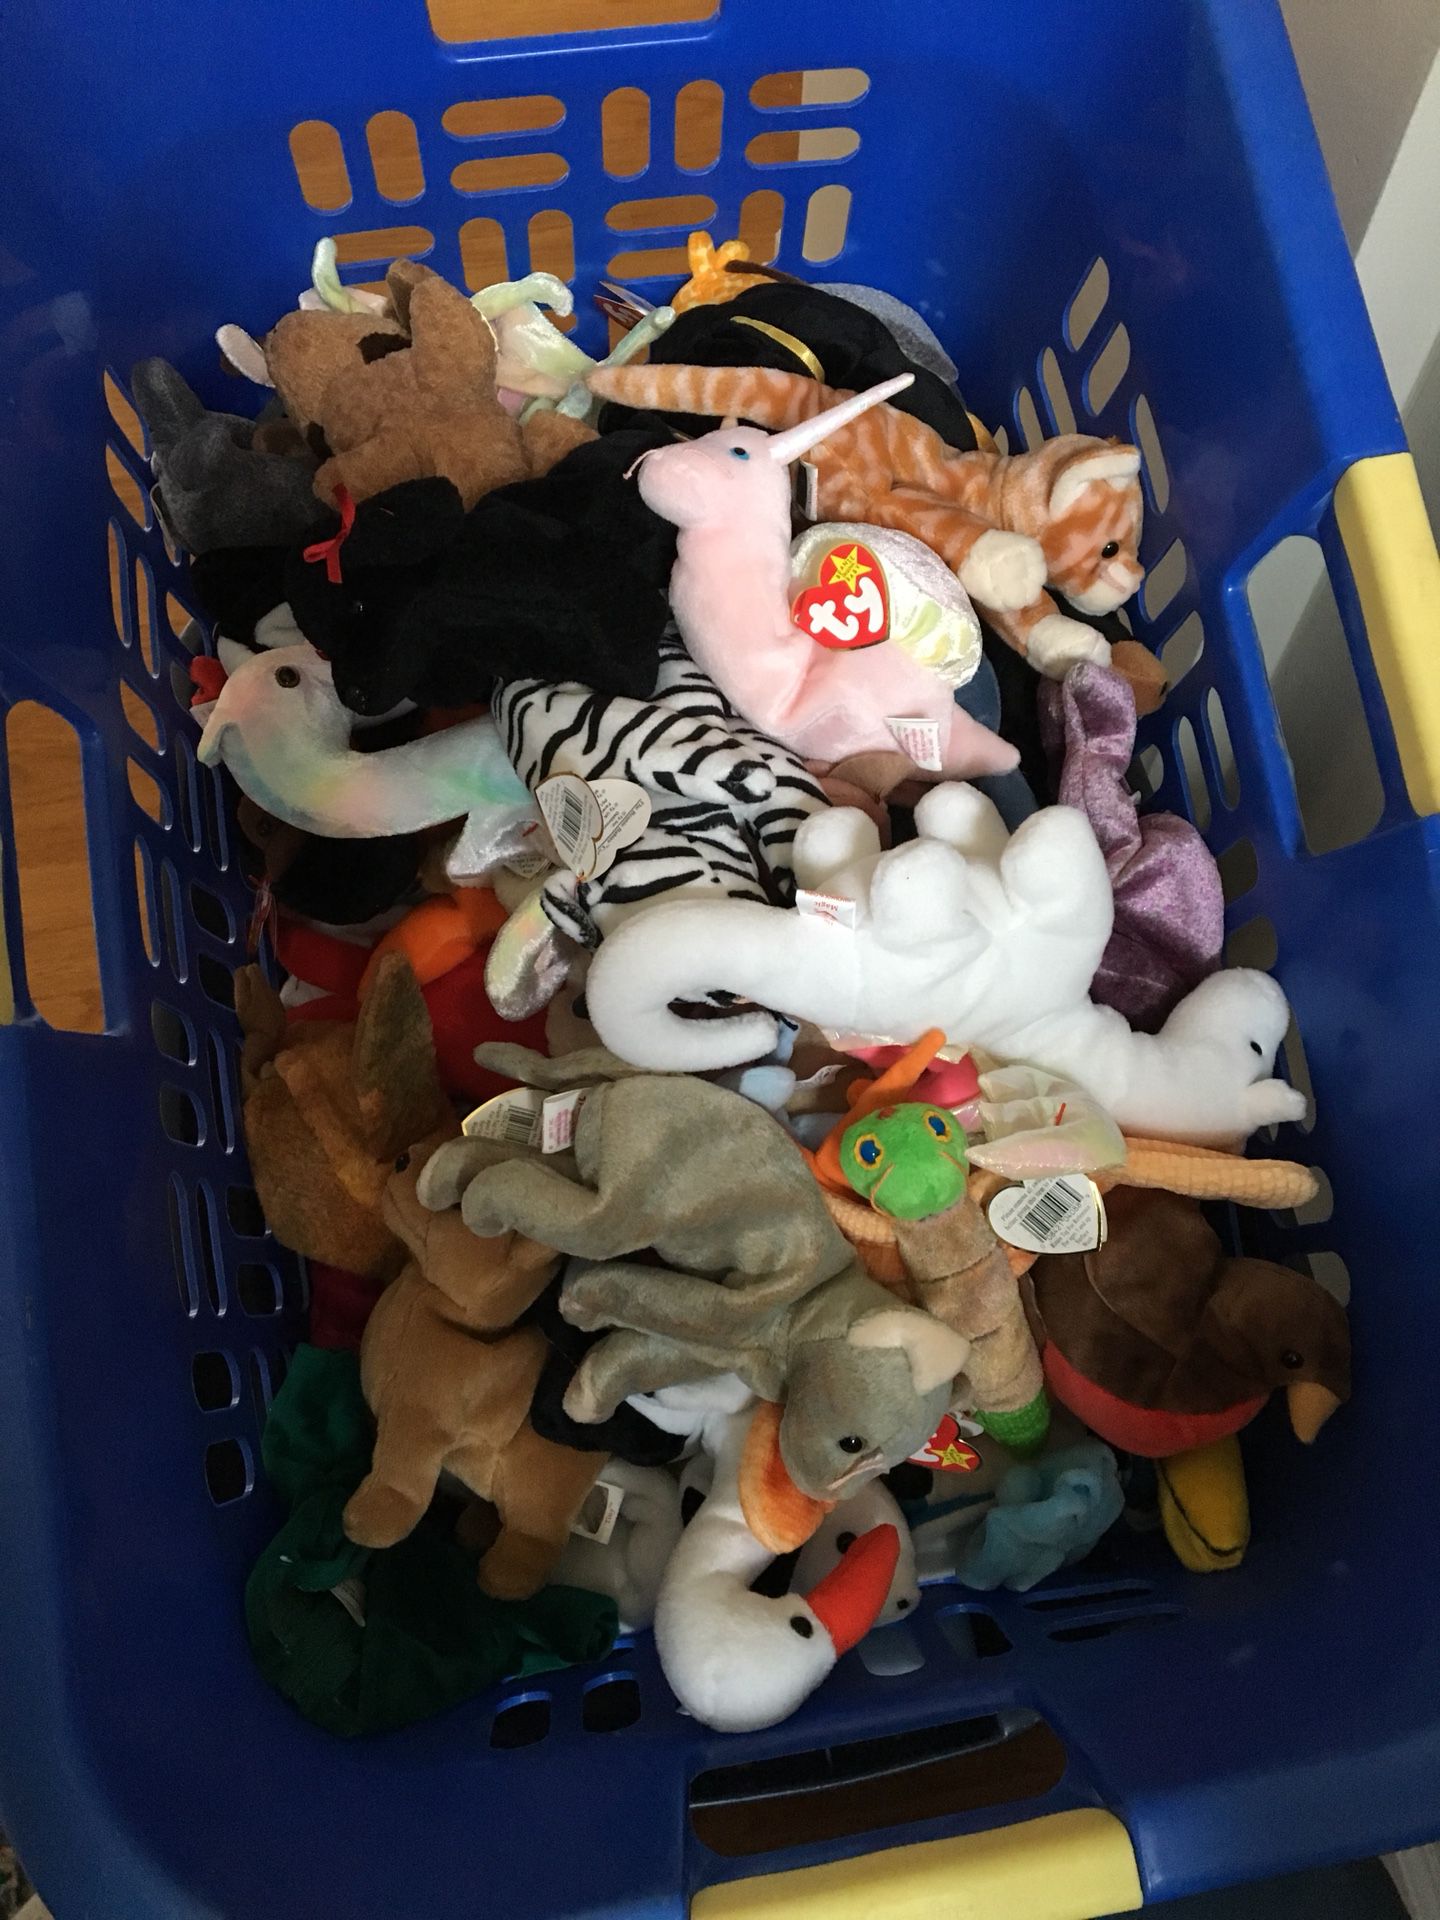 Beanie babies from the ‘90’s